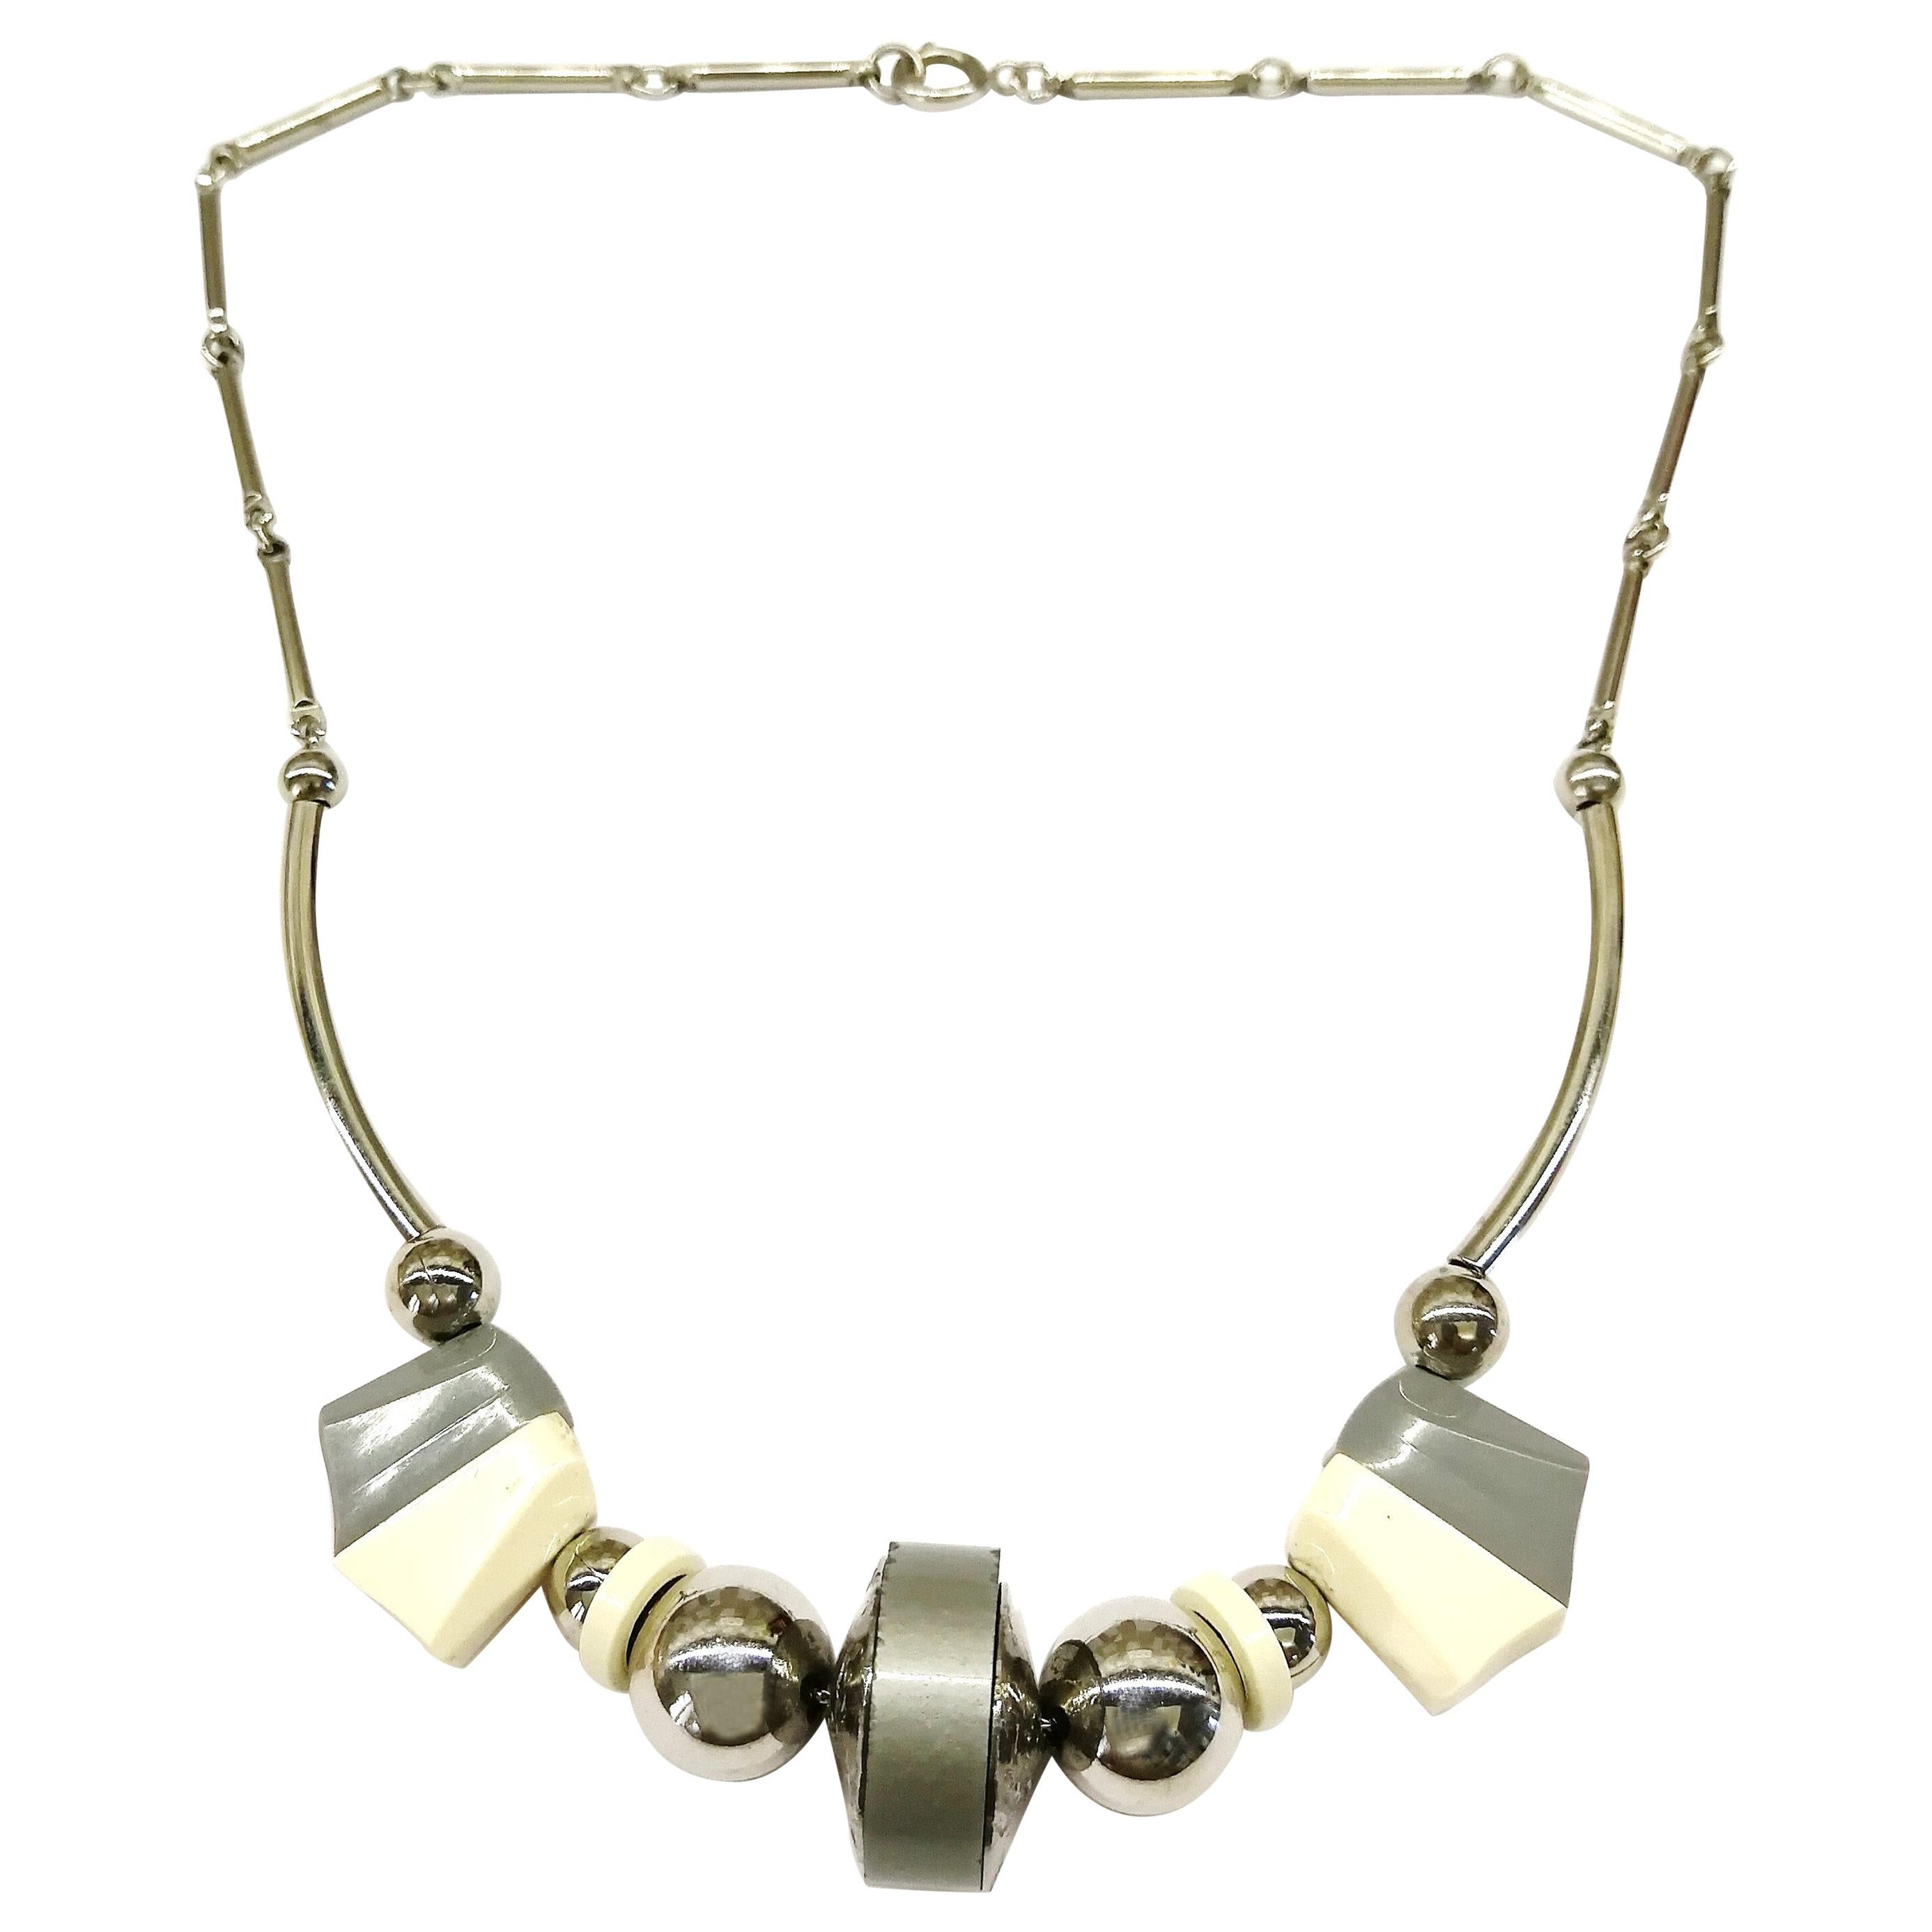 An Art Deco grey and cream Bakelite, chrome metal necklace, Germany, 1930s